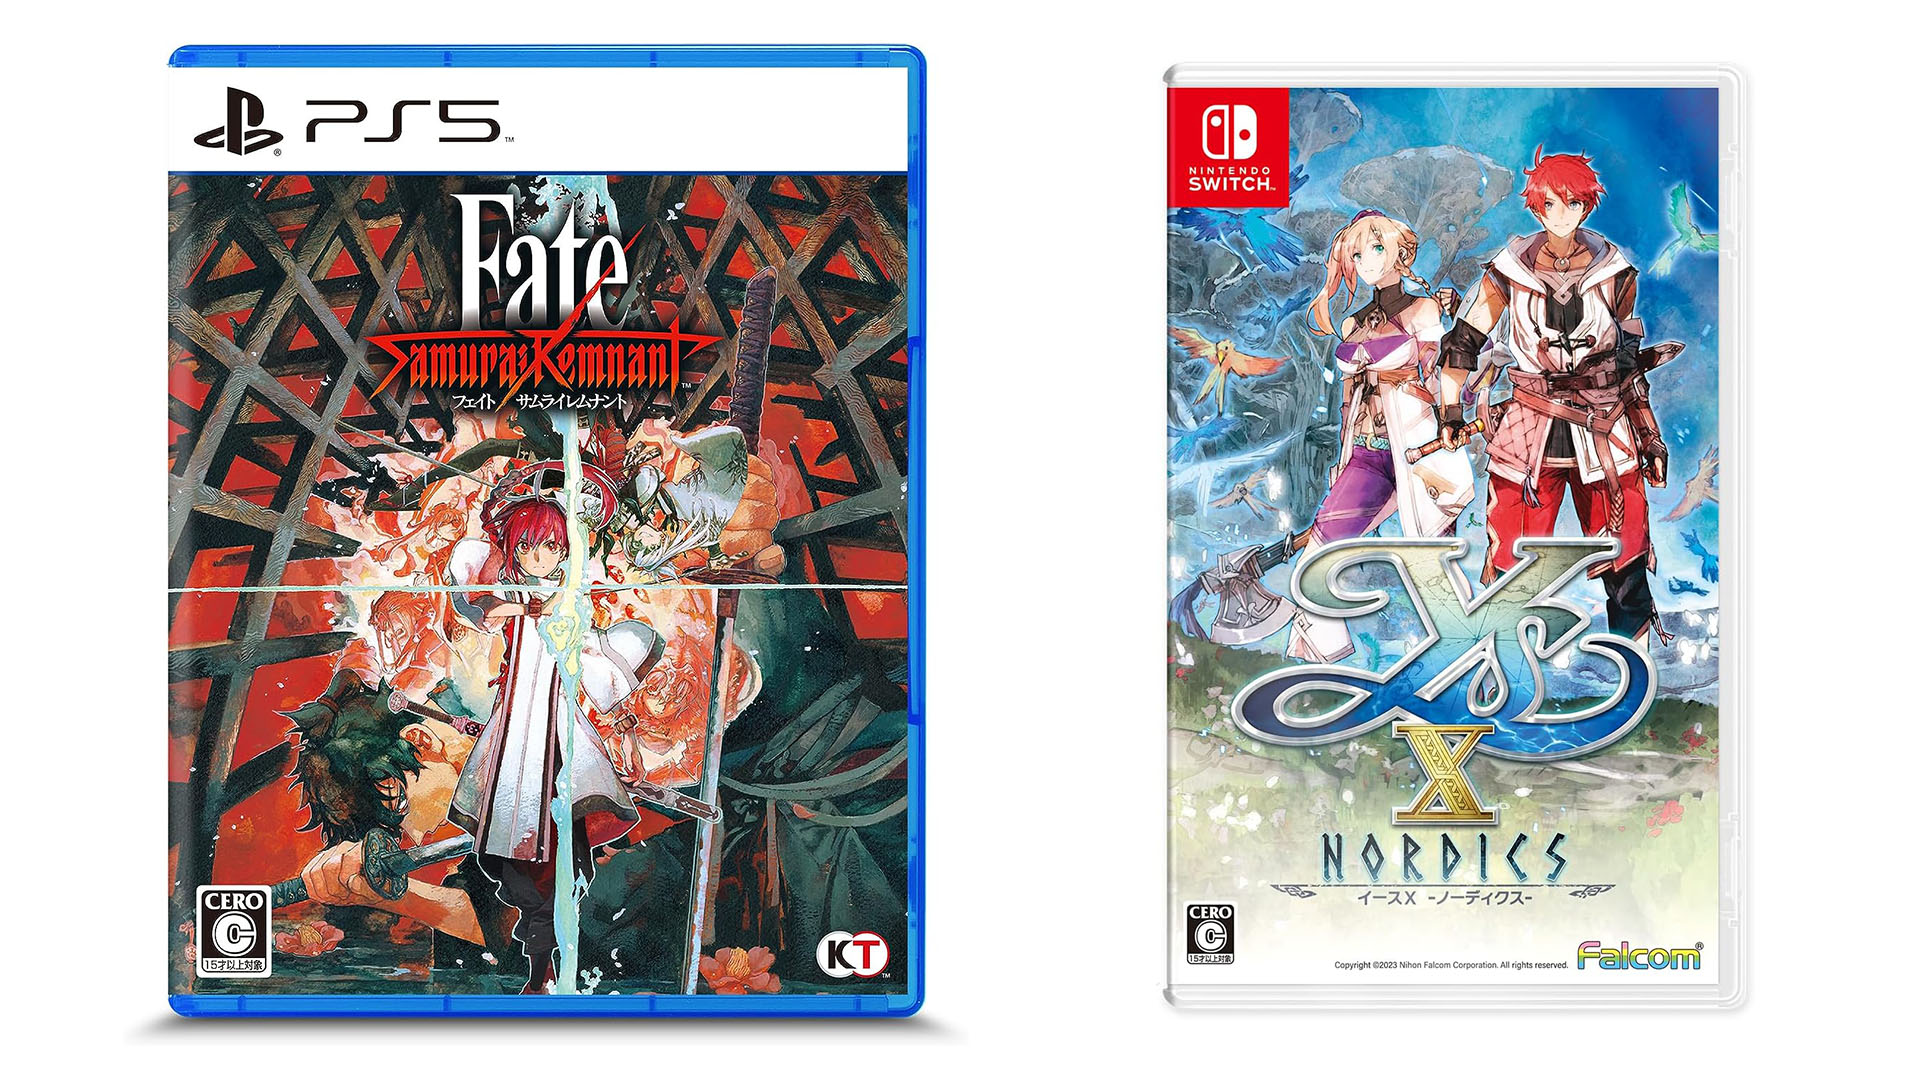 This Week's Japanese Game Releases: Fate/Samurai Remnant, Ys X 